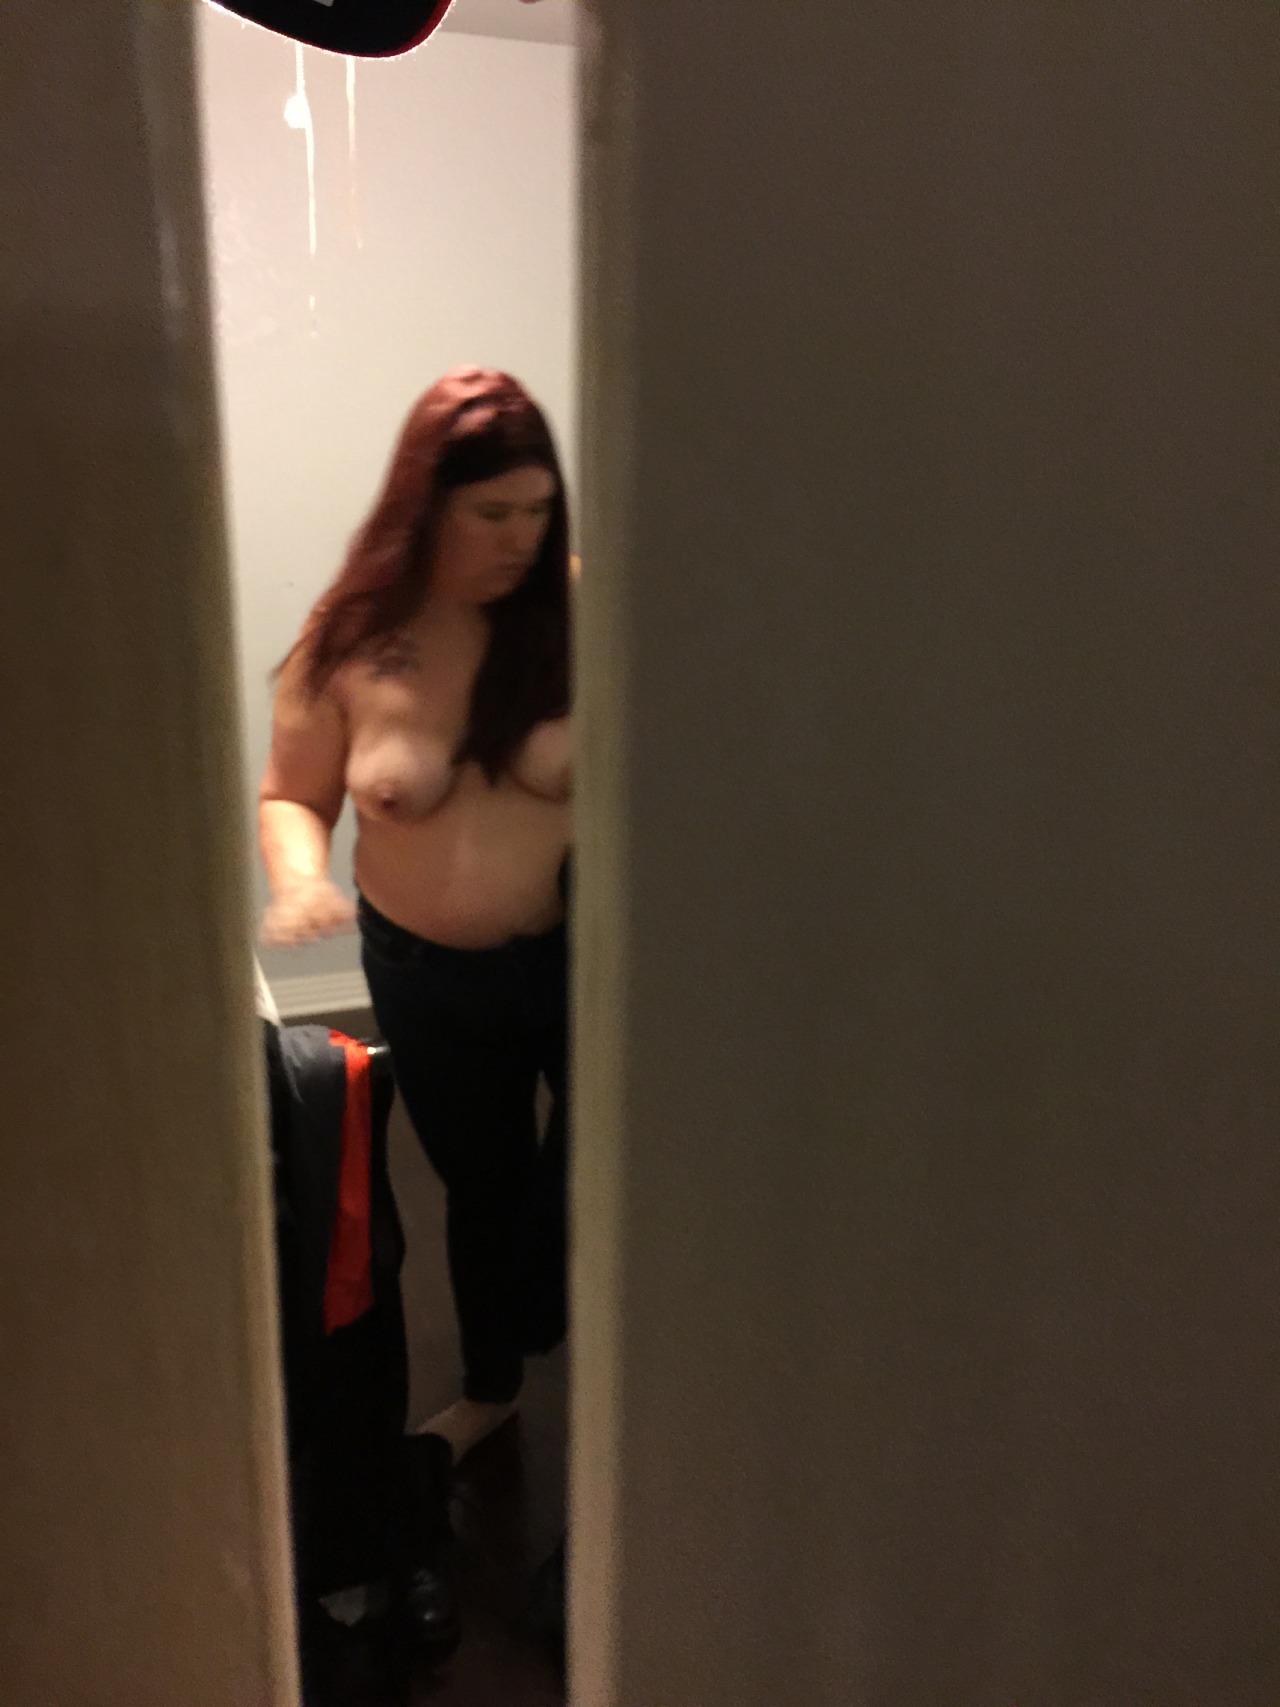 garrett71689:  #wife getting #dressed this morning #sexy #chubby #milf #tits #sexy